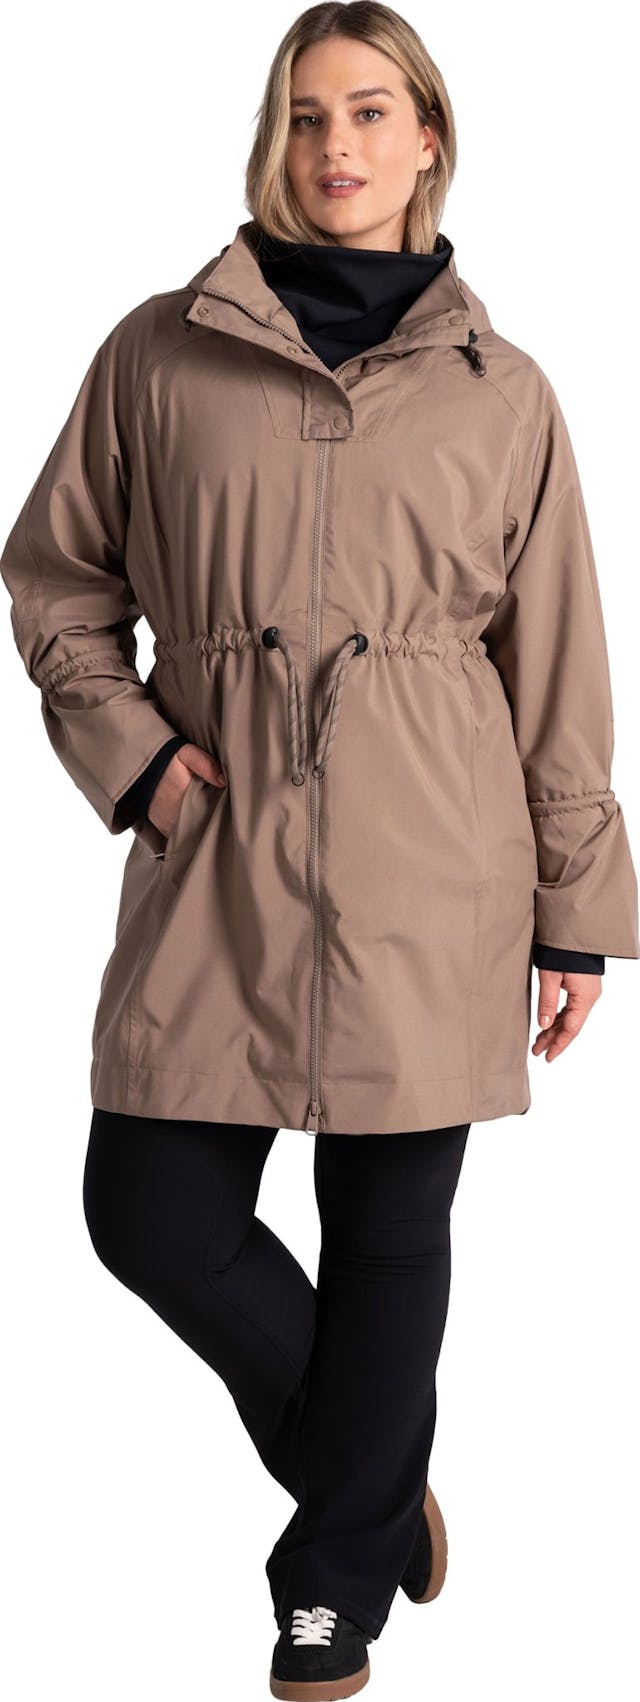 Product image for Piper Rain Jacket - Women's